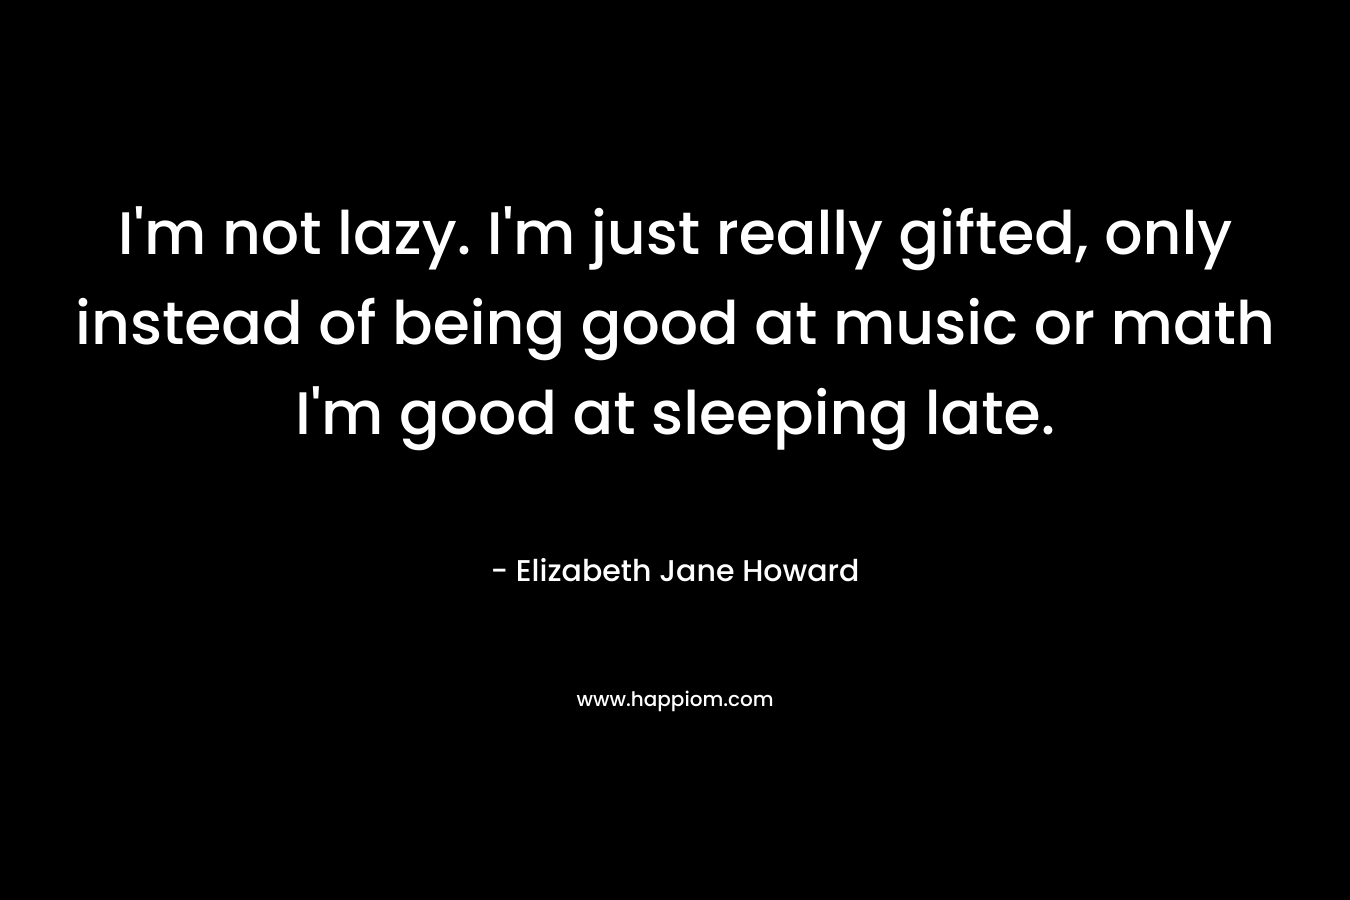 I’m not lazy. I’m just really gifted, only instead of being good at music or math I’m good at sleeping late. – Elizabeth Jane Howard